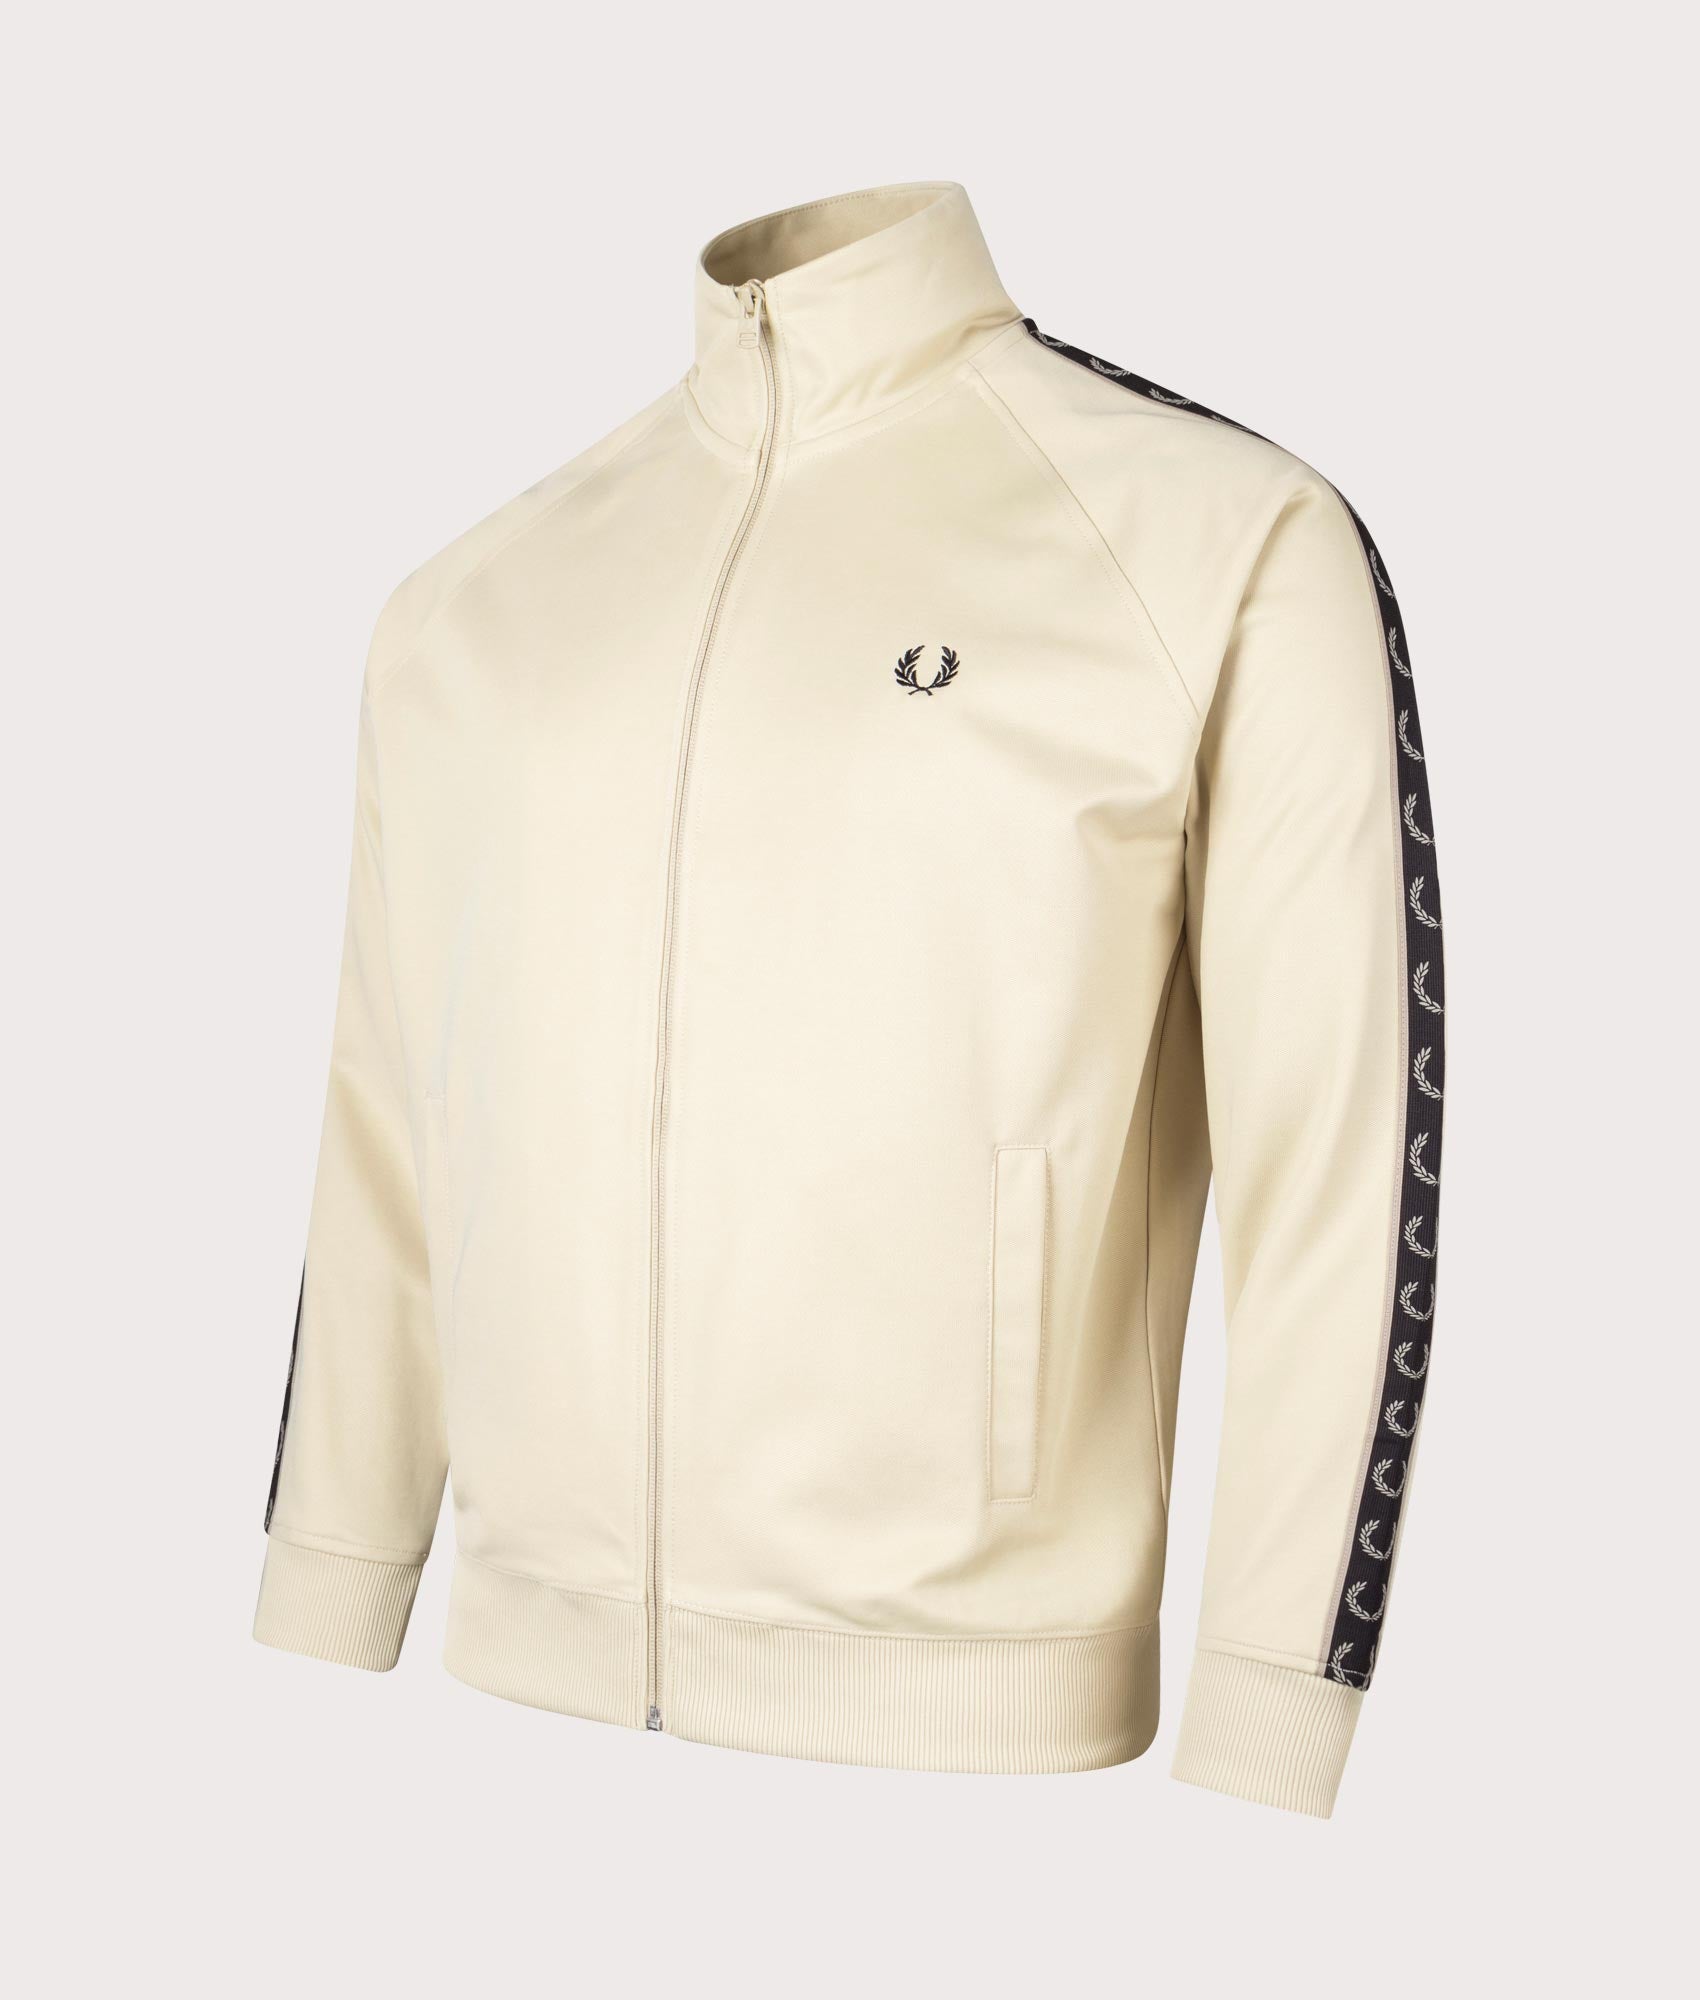 Fred Perry Mens Contrast Tape Track Top - Colour: V57 Oatmeal/Warm Grey - Size: Medium